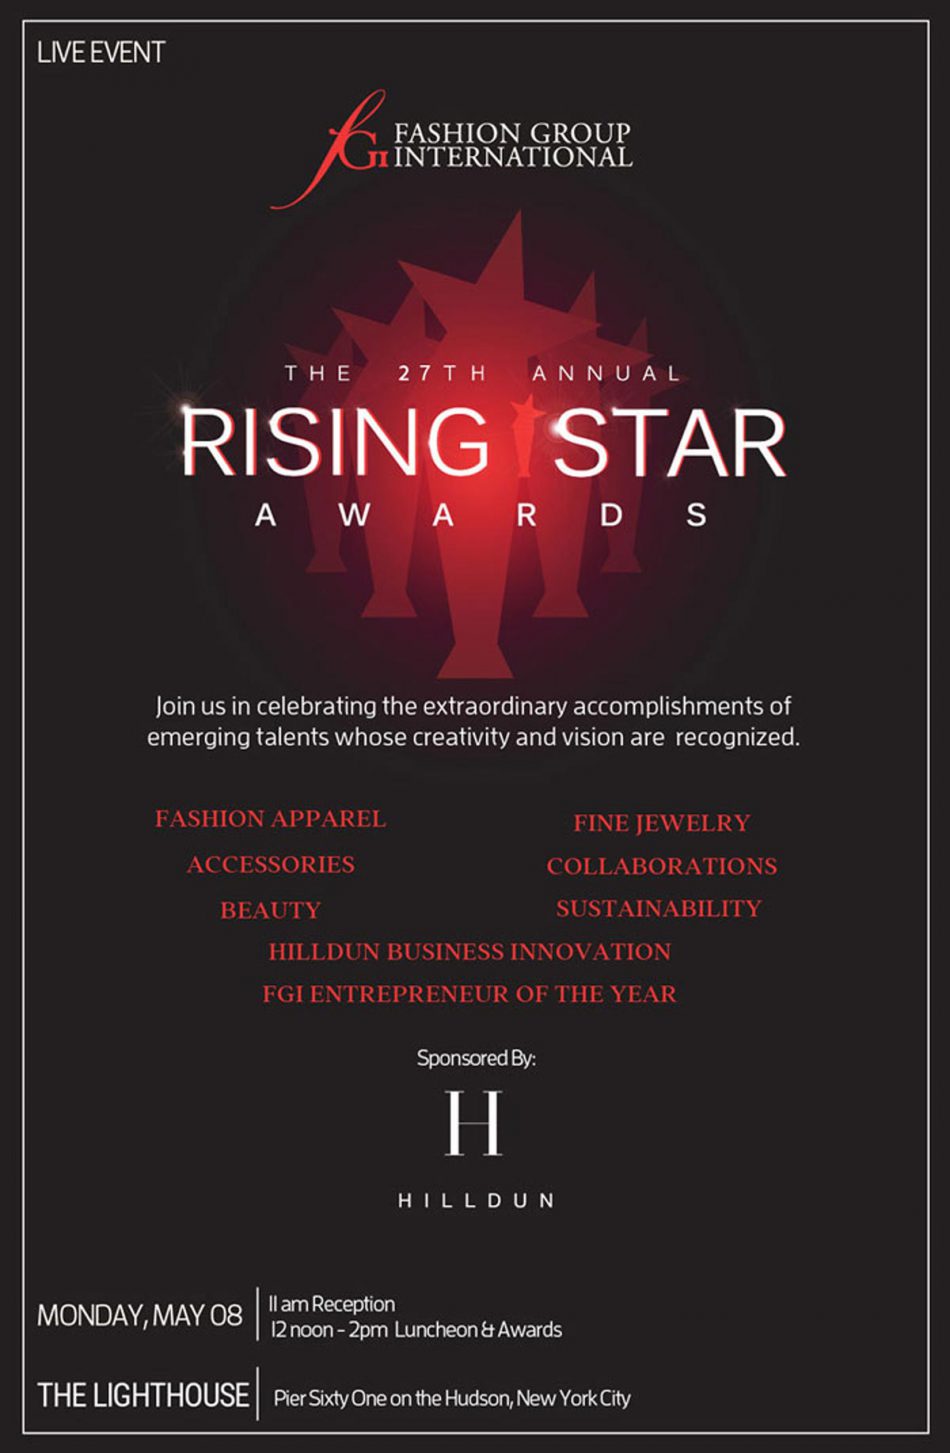 FGI Rising Star Awards Presenters to Include Nigel Barker, Laquan Smith, and more